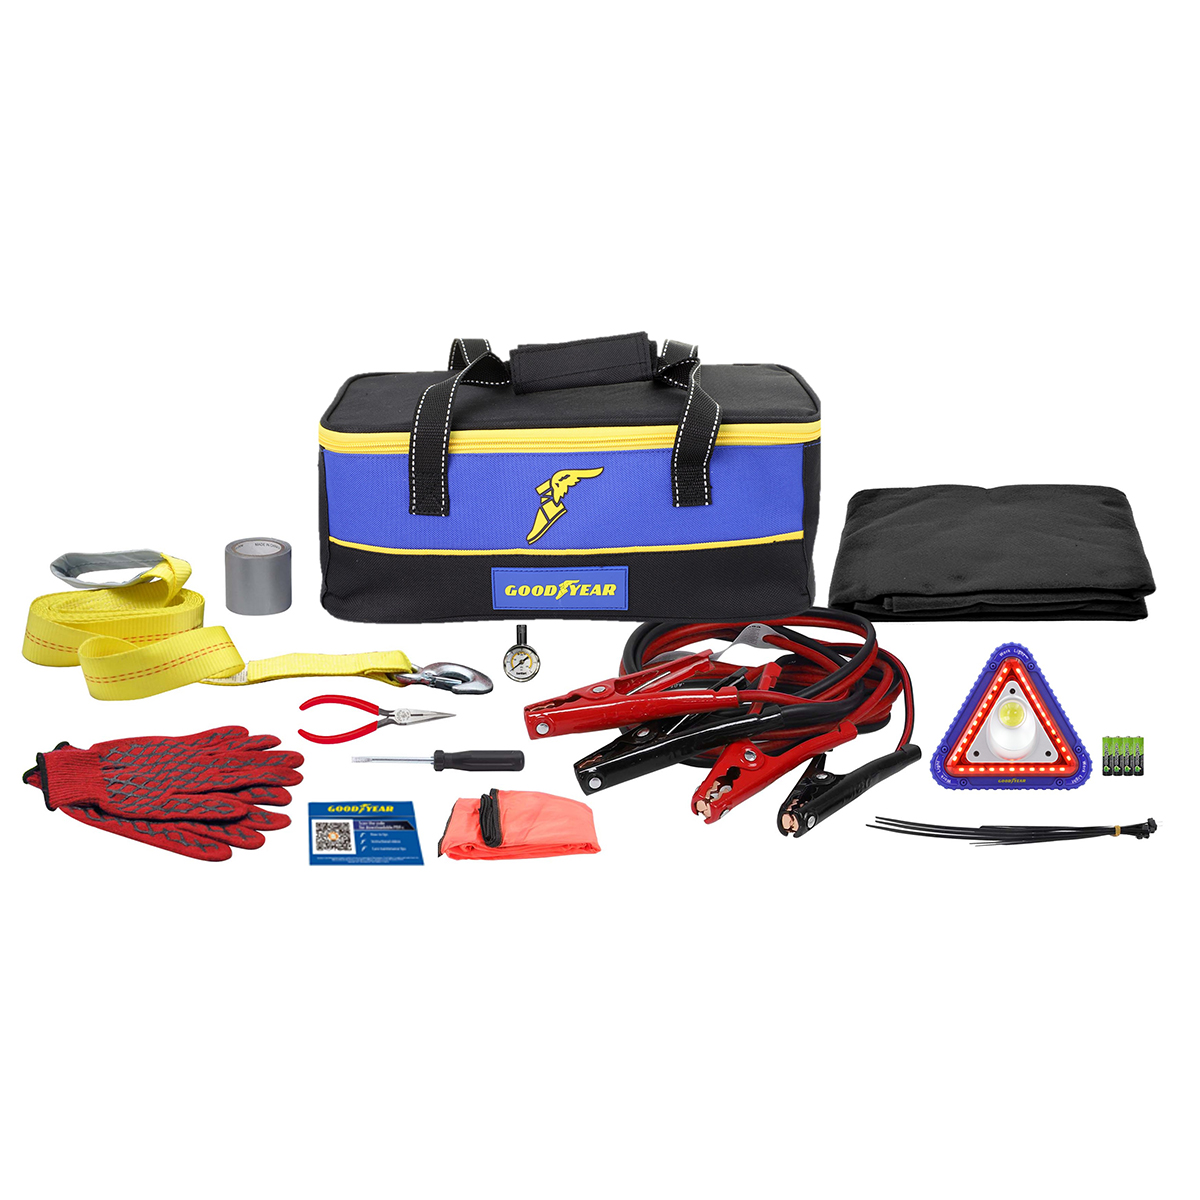 Goodyear Truck Kit GY5012 Gifts for Him Roadside Emergency Automotive Safety Kit with 16FT Jumper Cables and Visibility Items